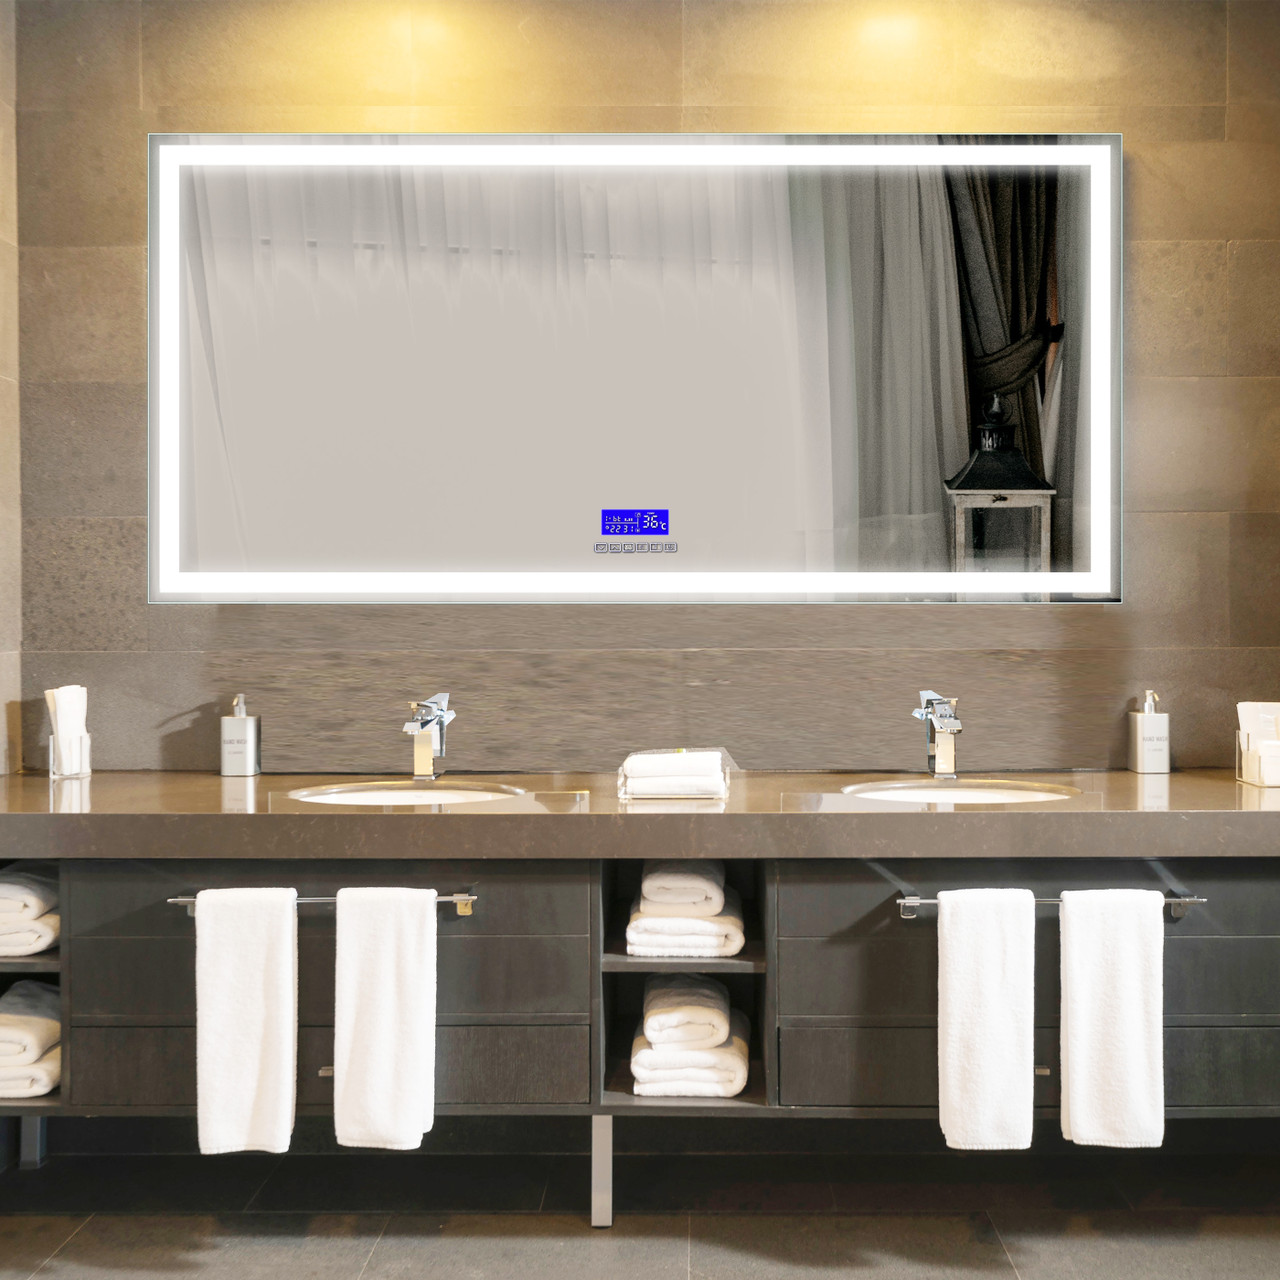 Moreno Florence 76''W x35.5''H LED Mirror With Bluetooth, time and temperature | Moreno Bath LED Bathroom Mirror with Bluetooth